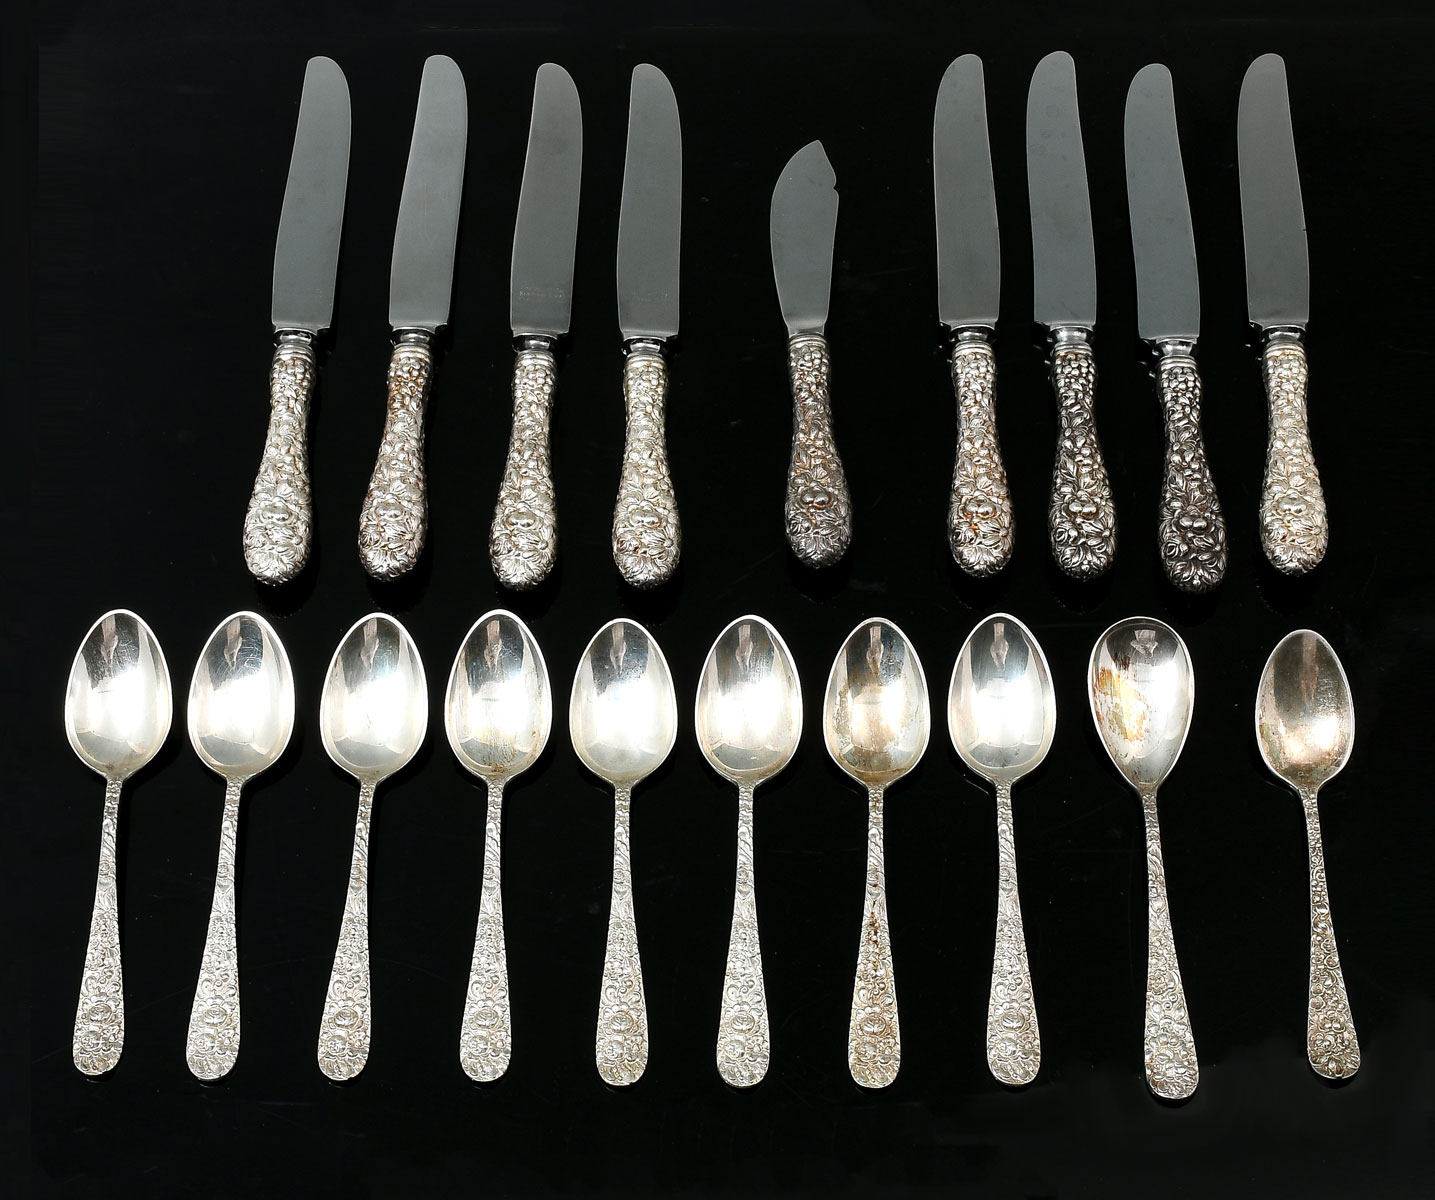 19 PC. STIEFF REPOUSSE STERLING